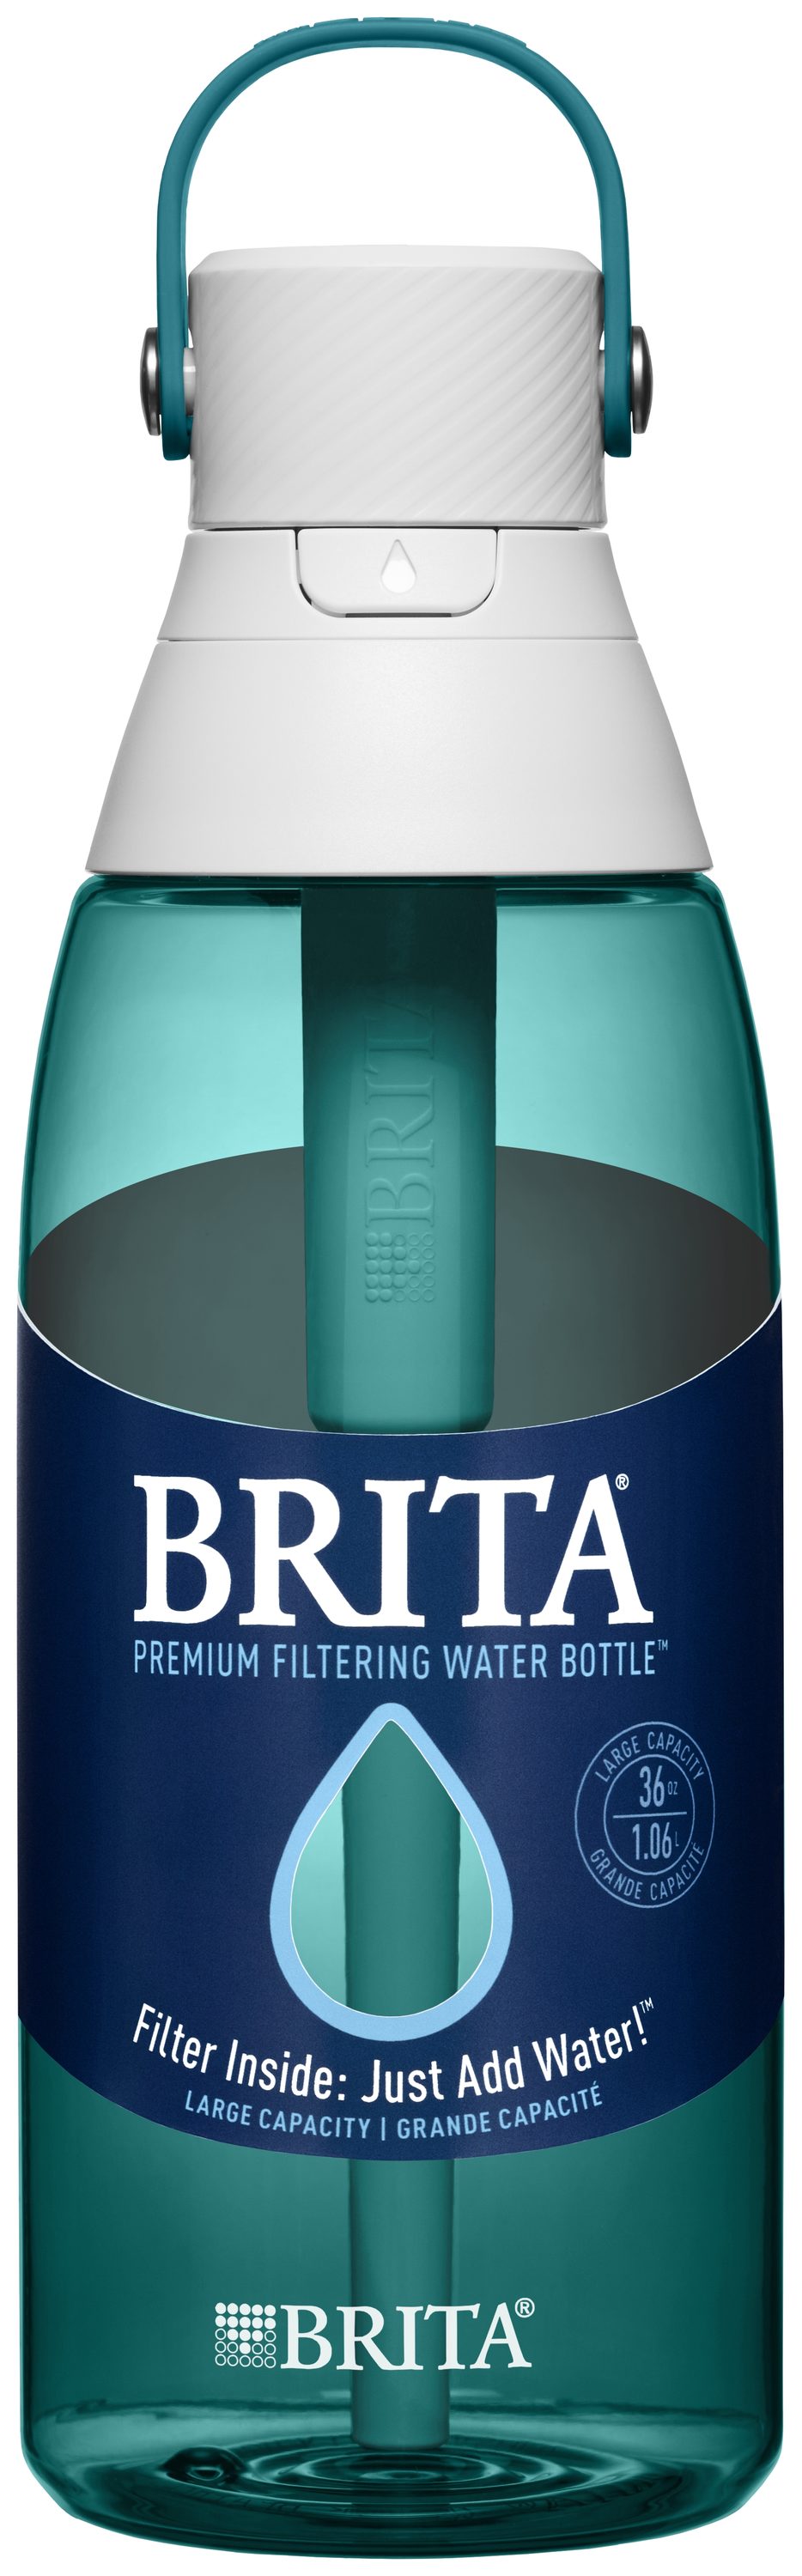 Cool travel product: Brita Hard Sided Water Filter Bottle - Road